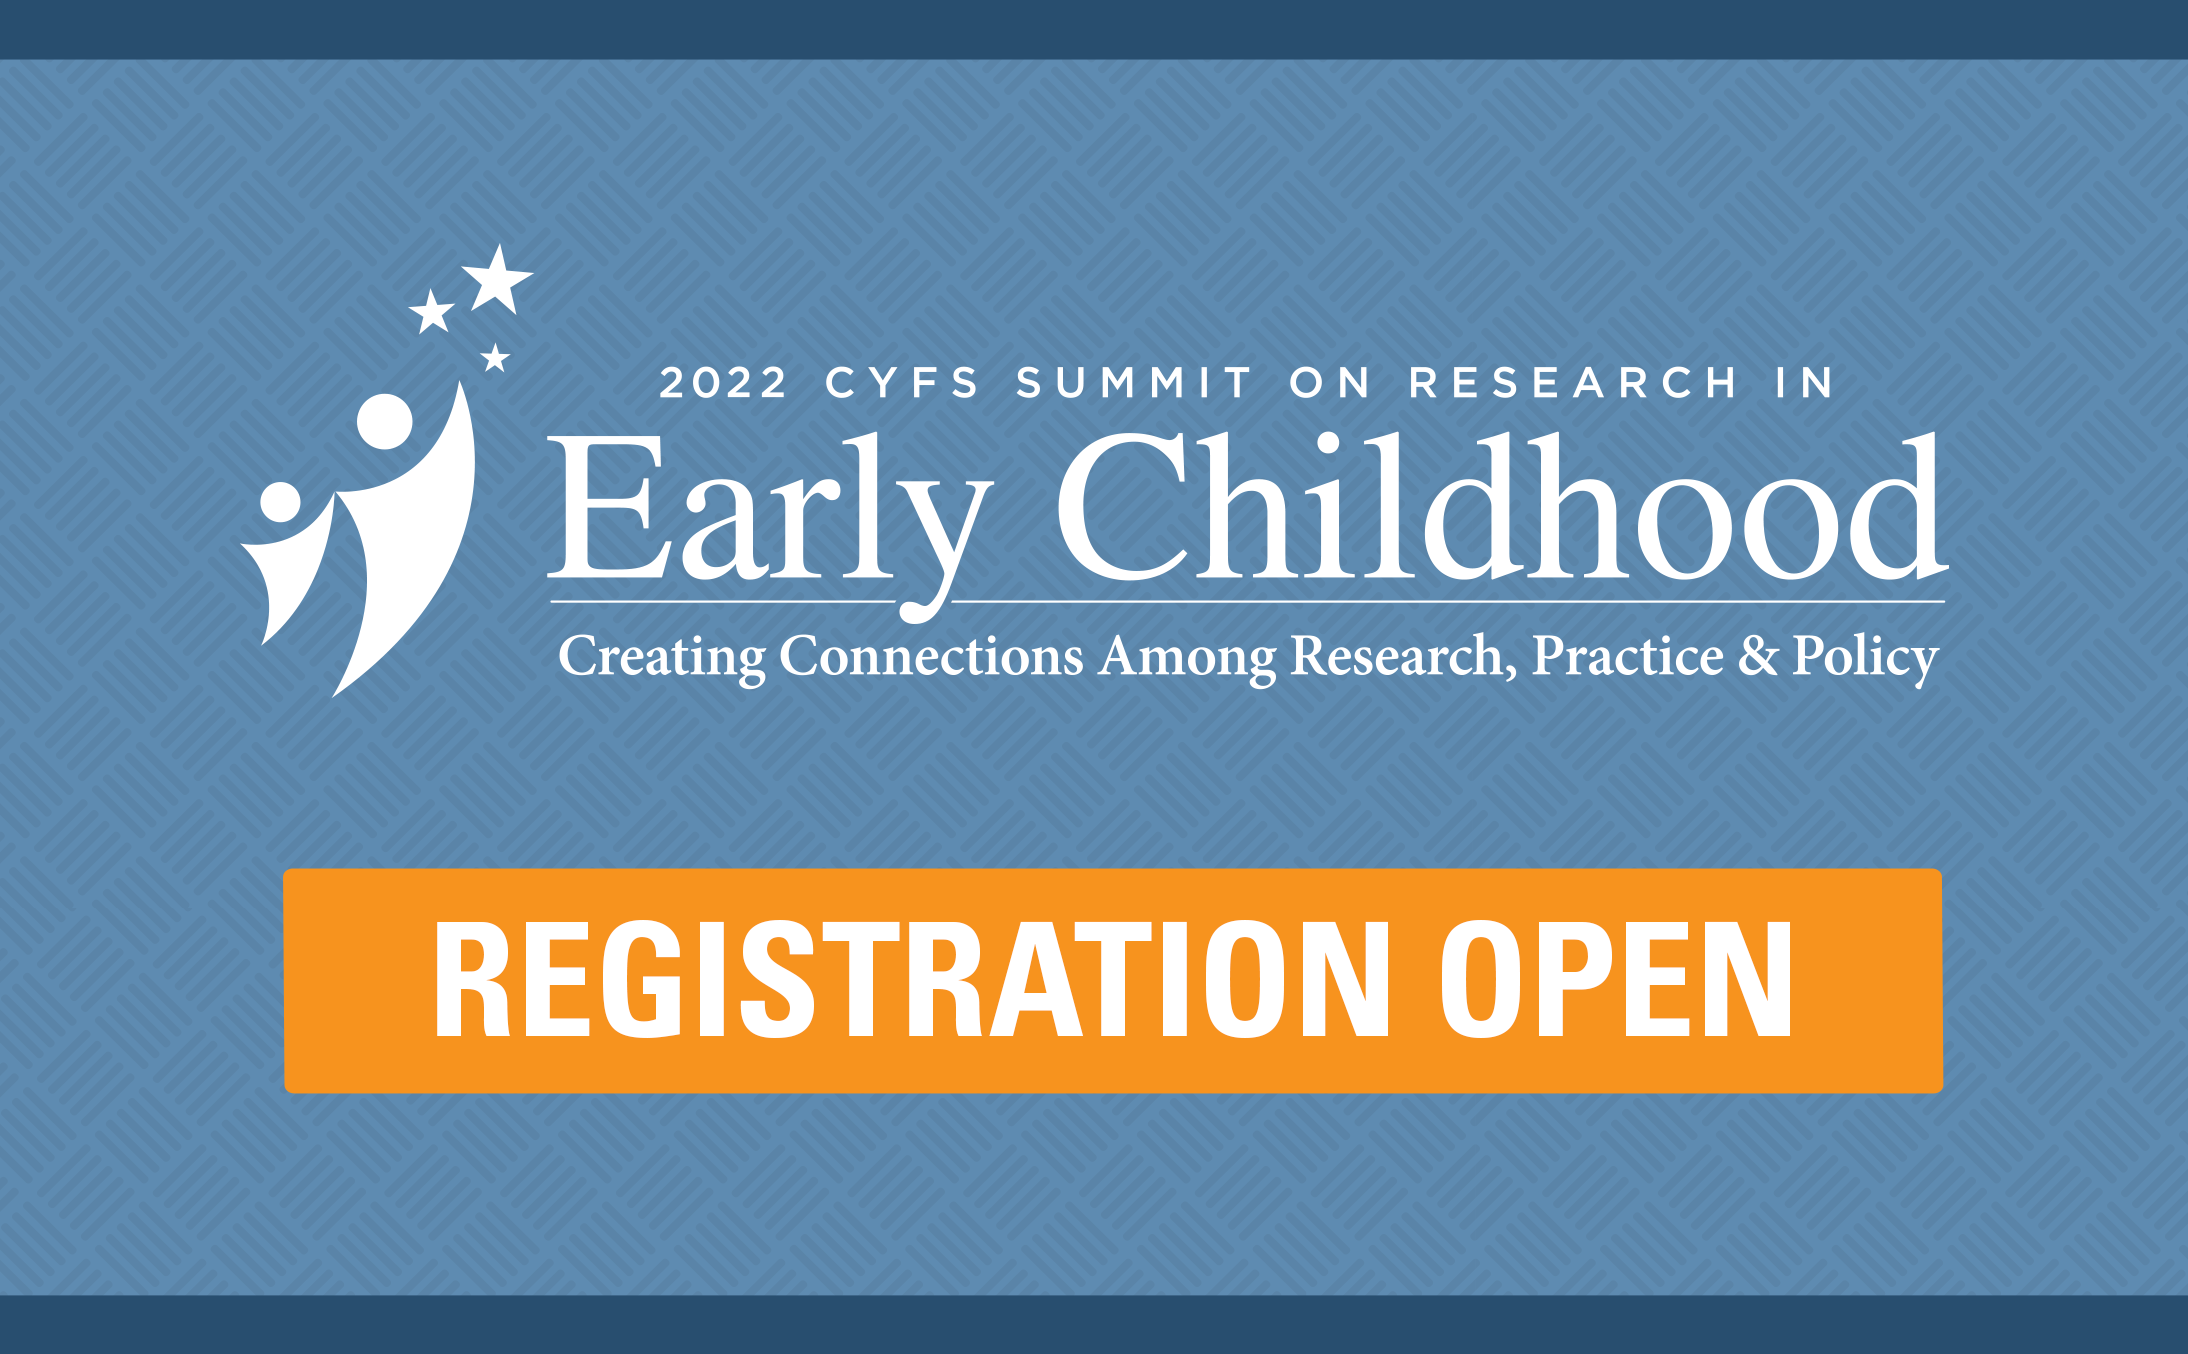 Light blue graphic promoting registration for Early Childhood Research Summit